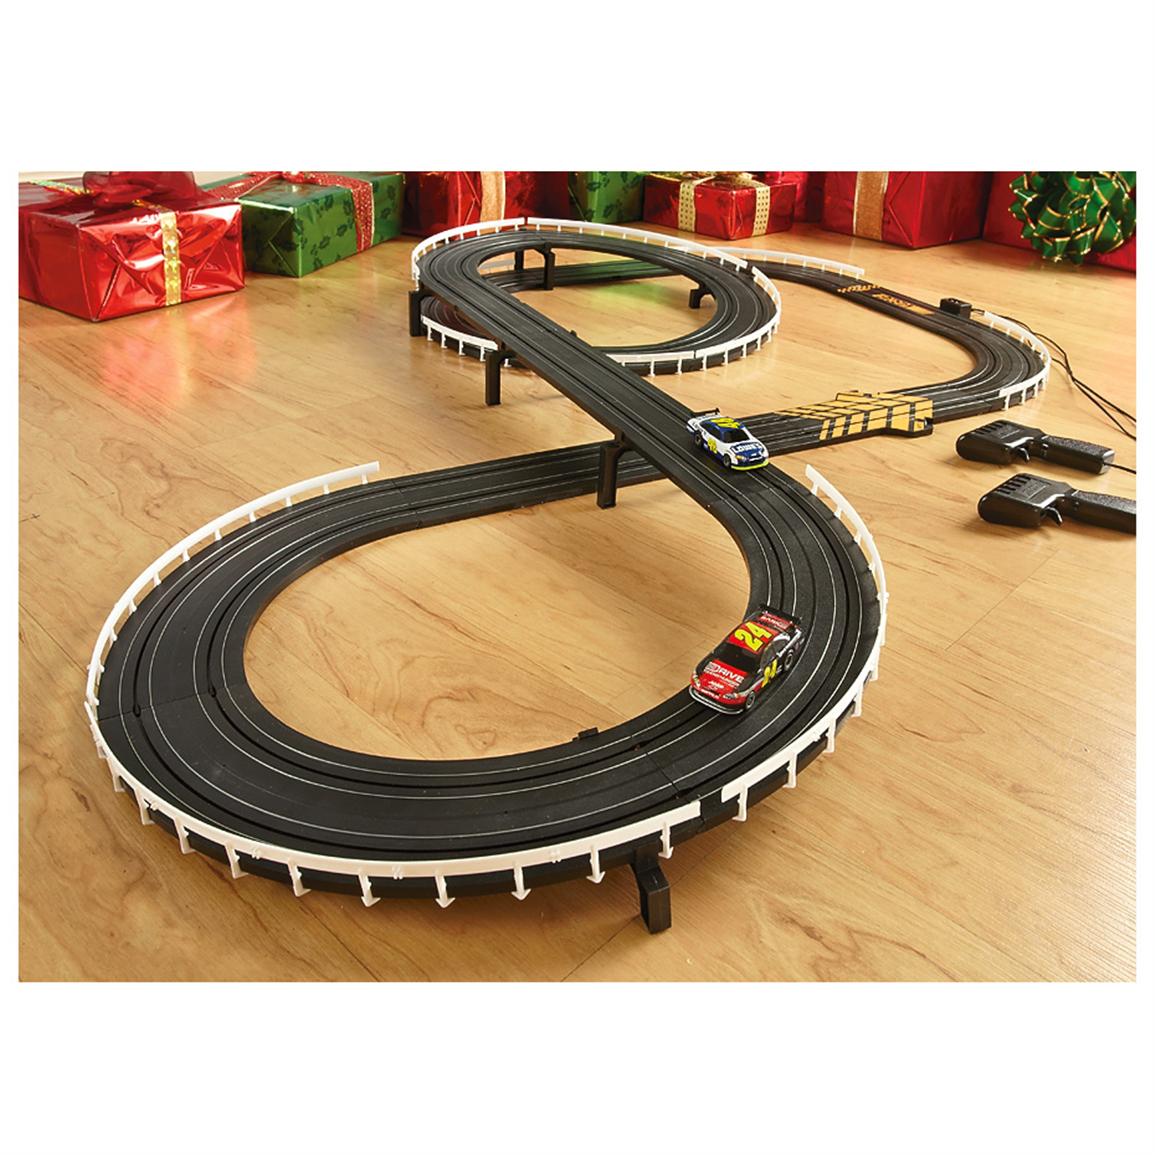 The quality and variety of slot car race track sets created by the various talented companies is so superb, that your choice greatly depends on your expectations of use.Differences in track width, slot depth, surface texture and ease of assembly may determine what slot car race track set is best for you.